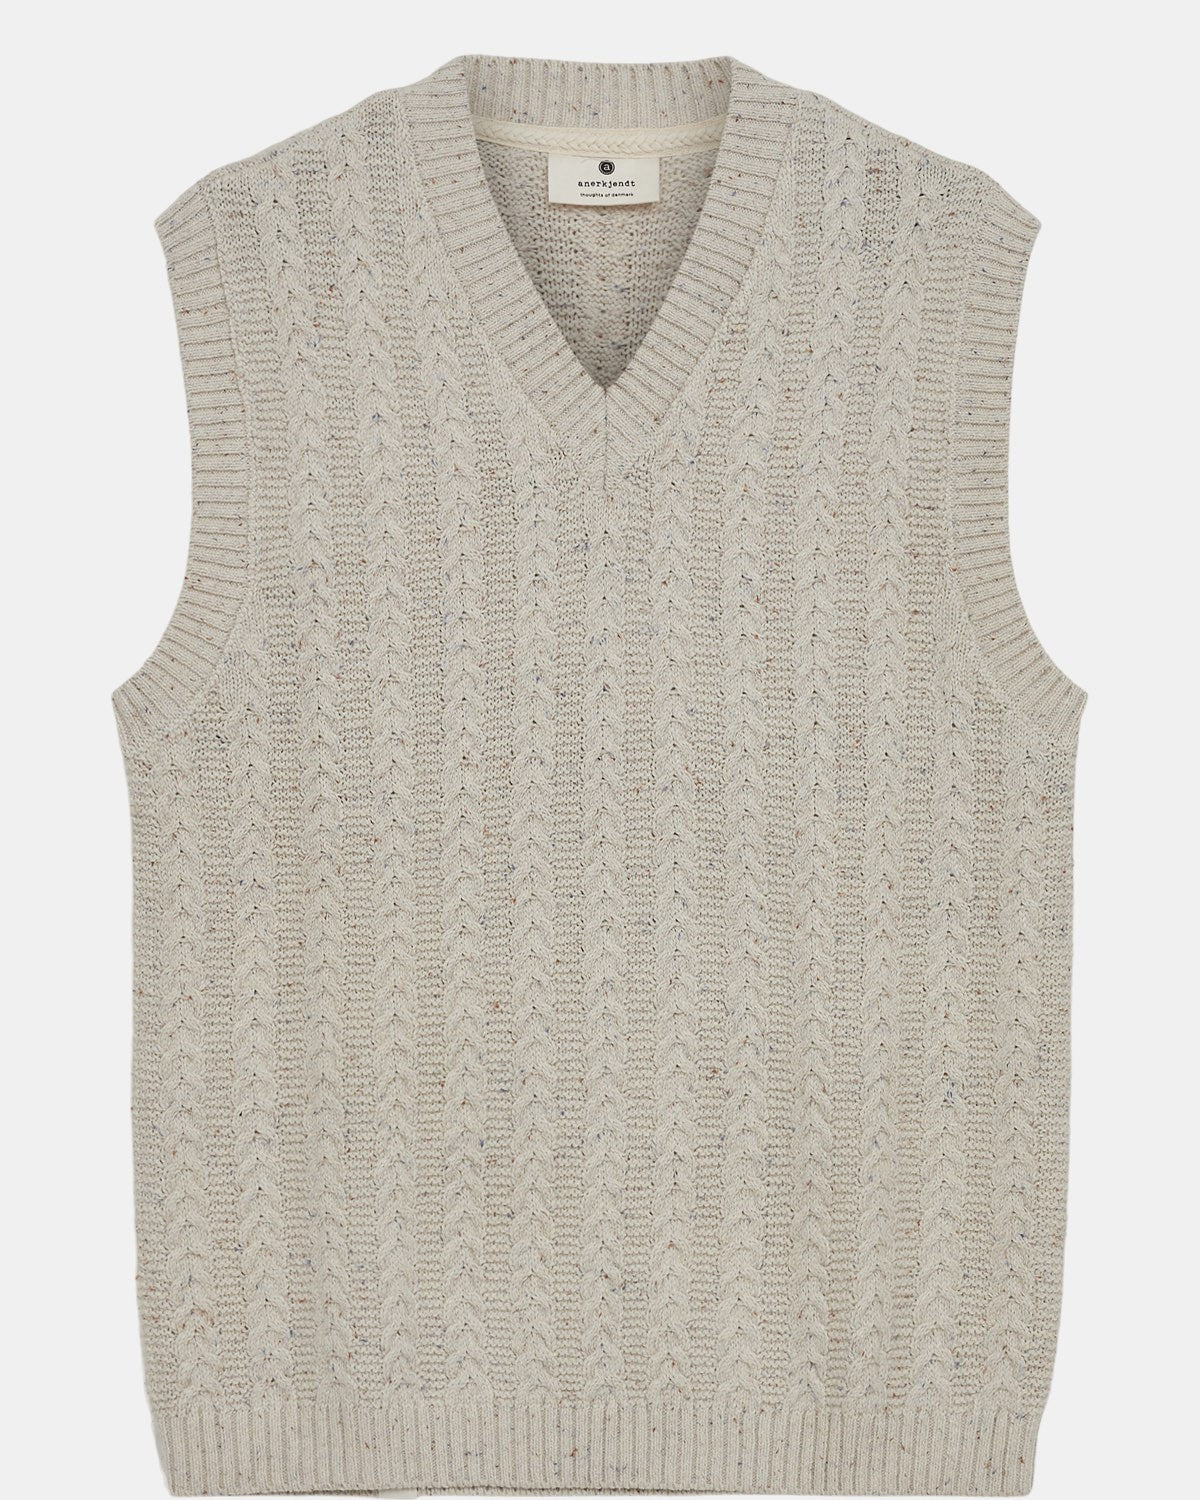 Knit ⇒ Knitted shirts for men in a Danish design